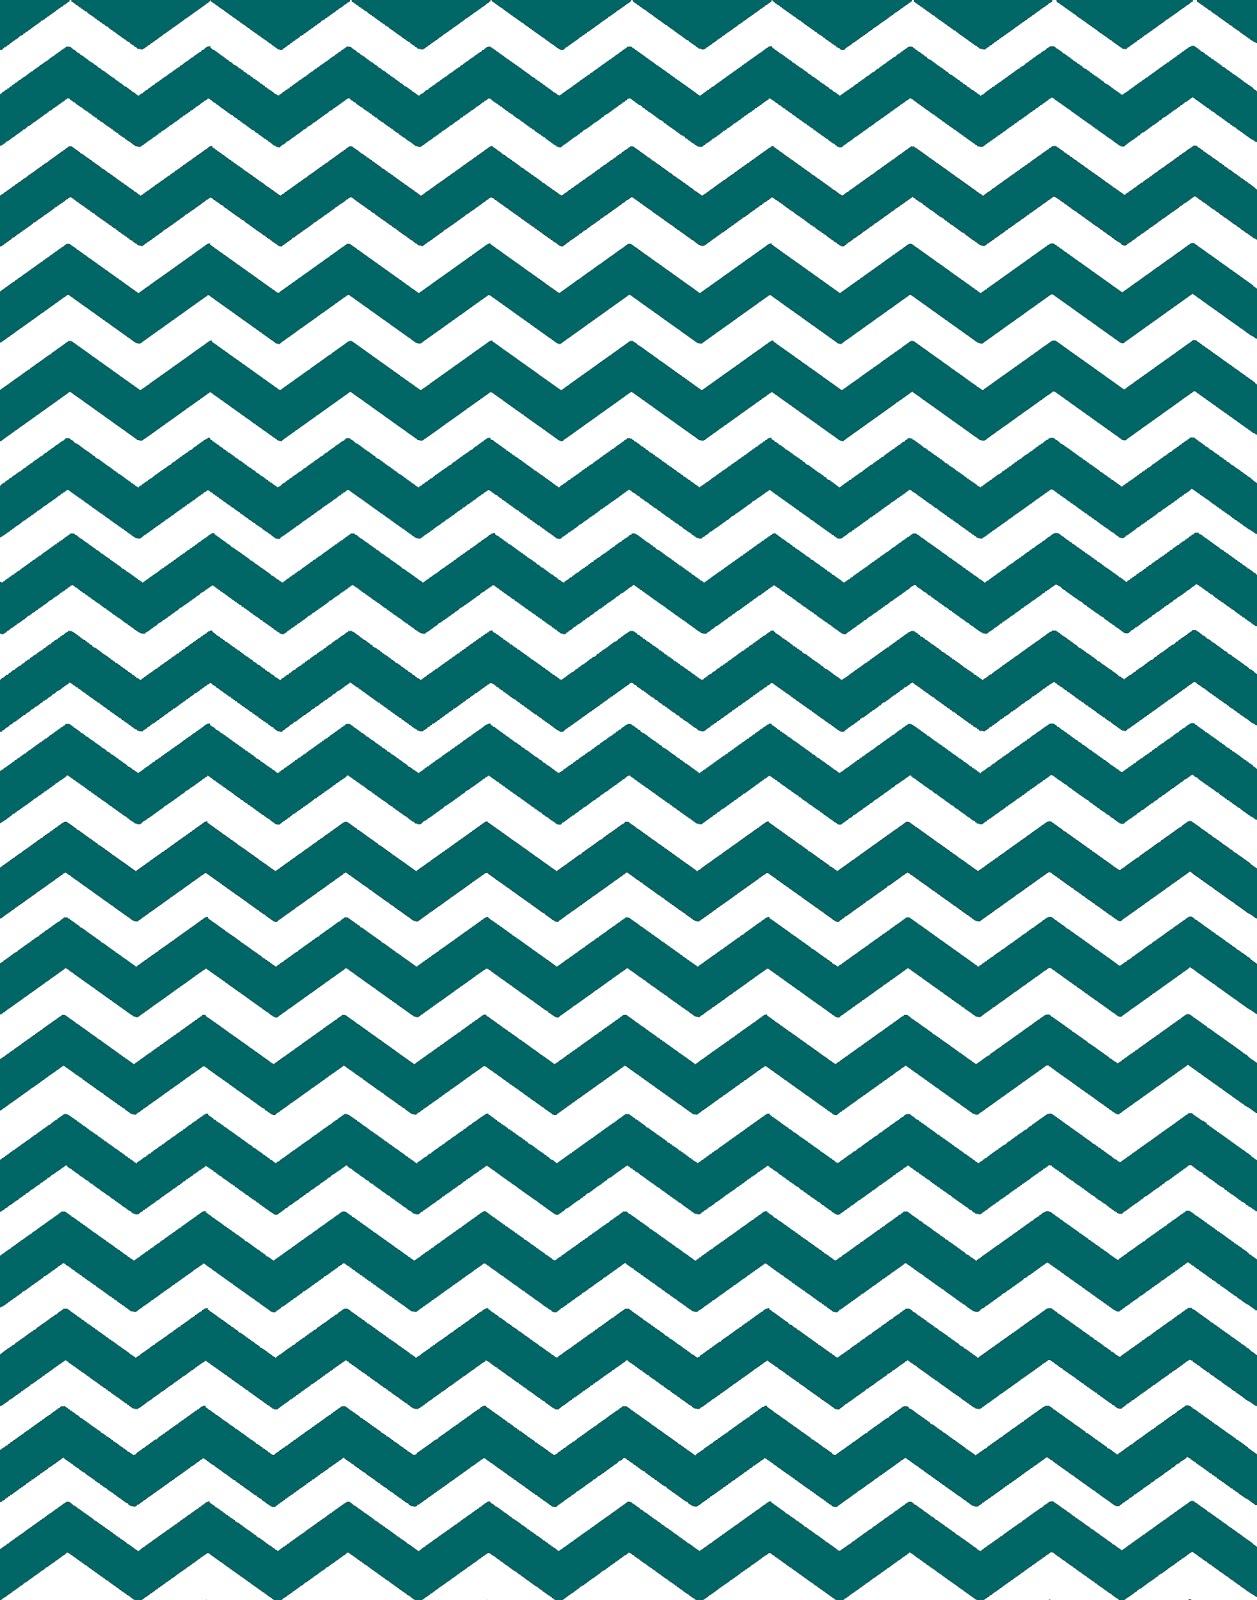 16 New Colors Chevron background patterns